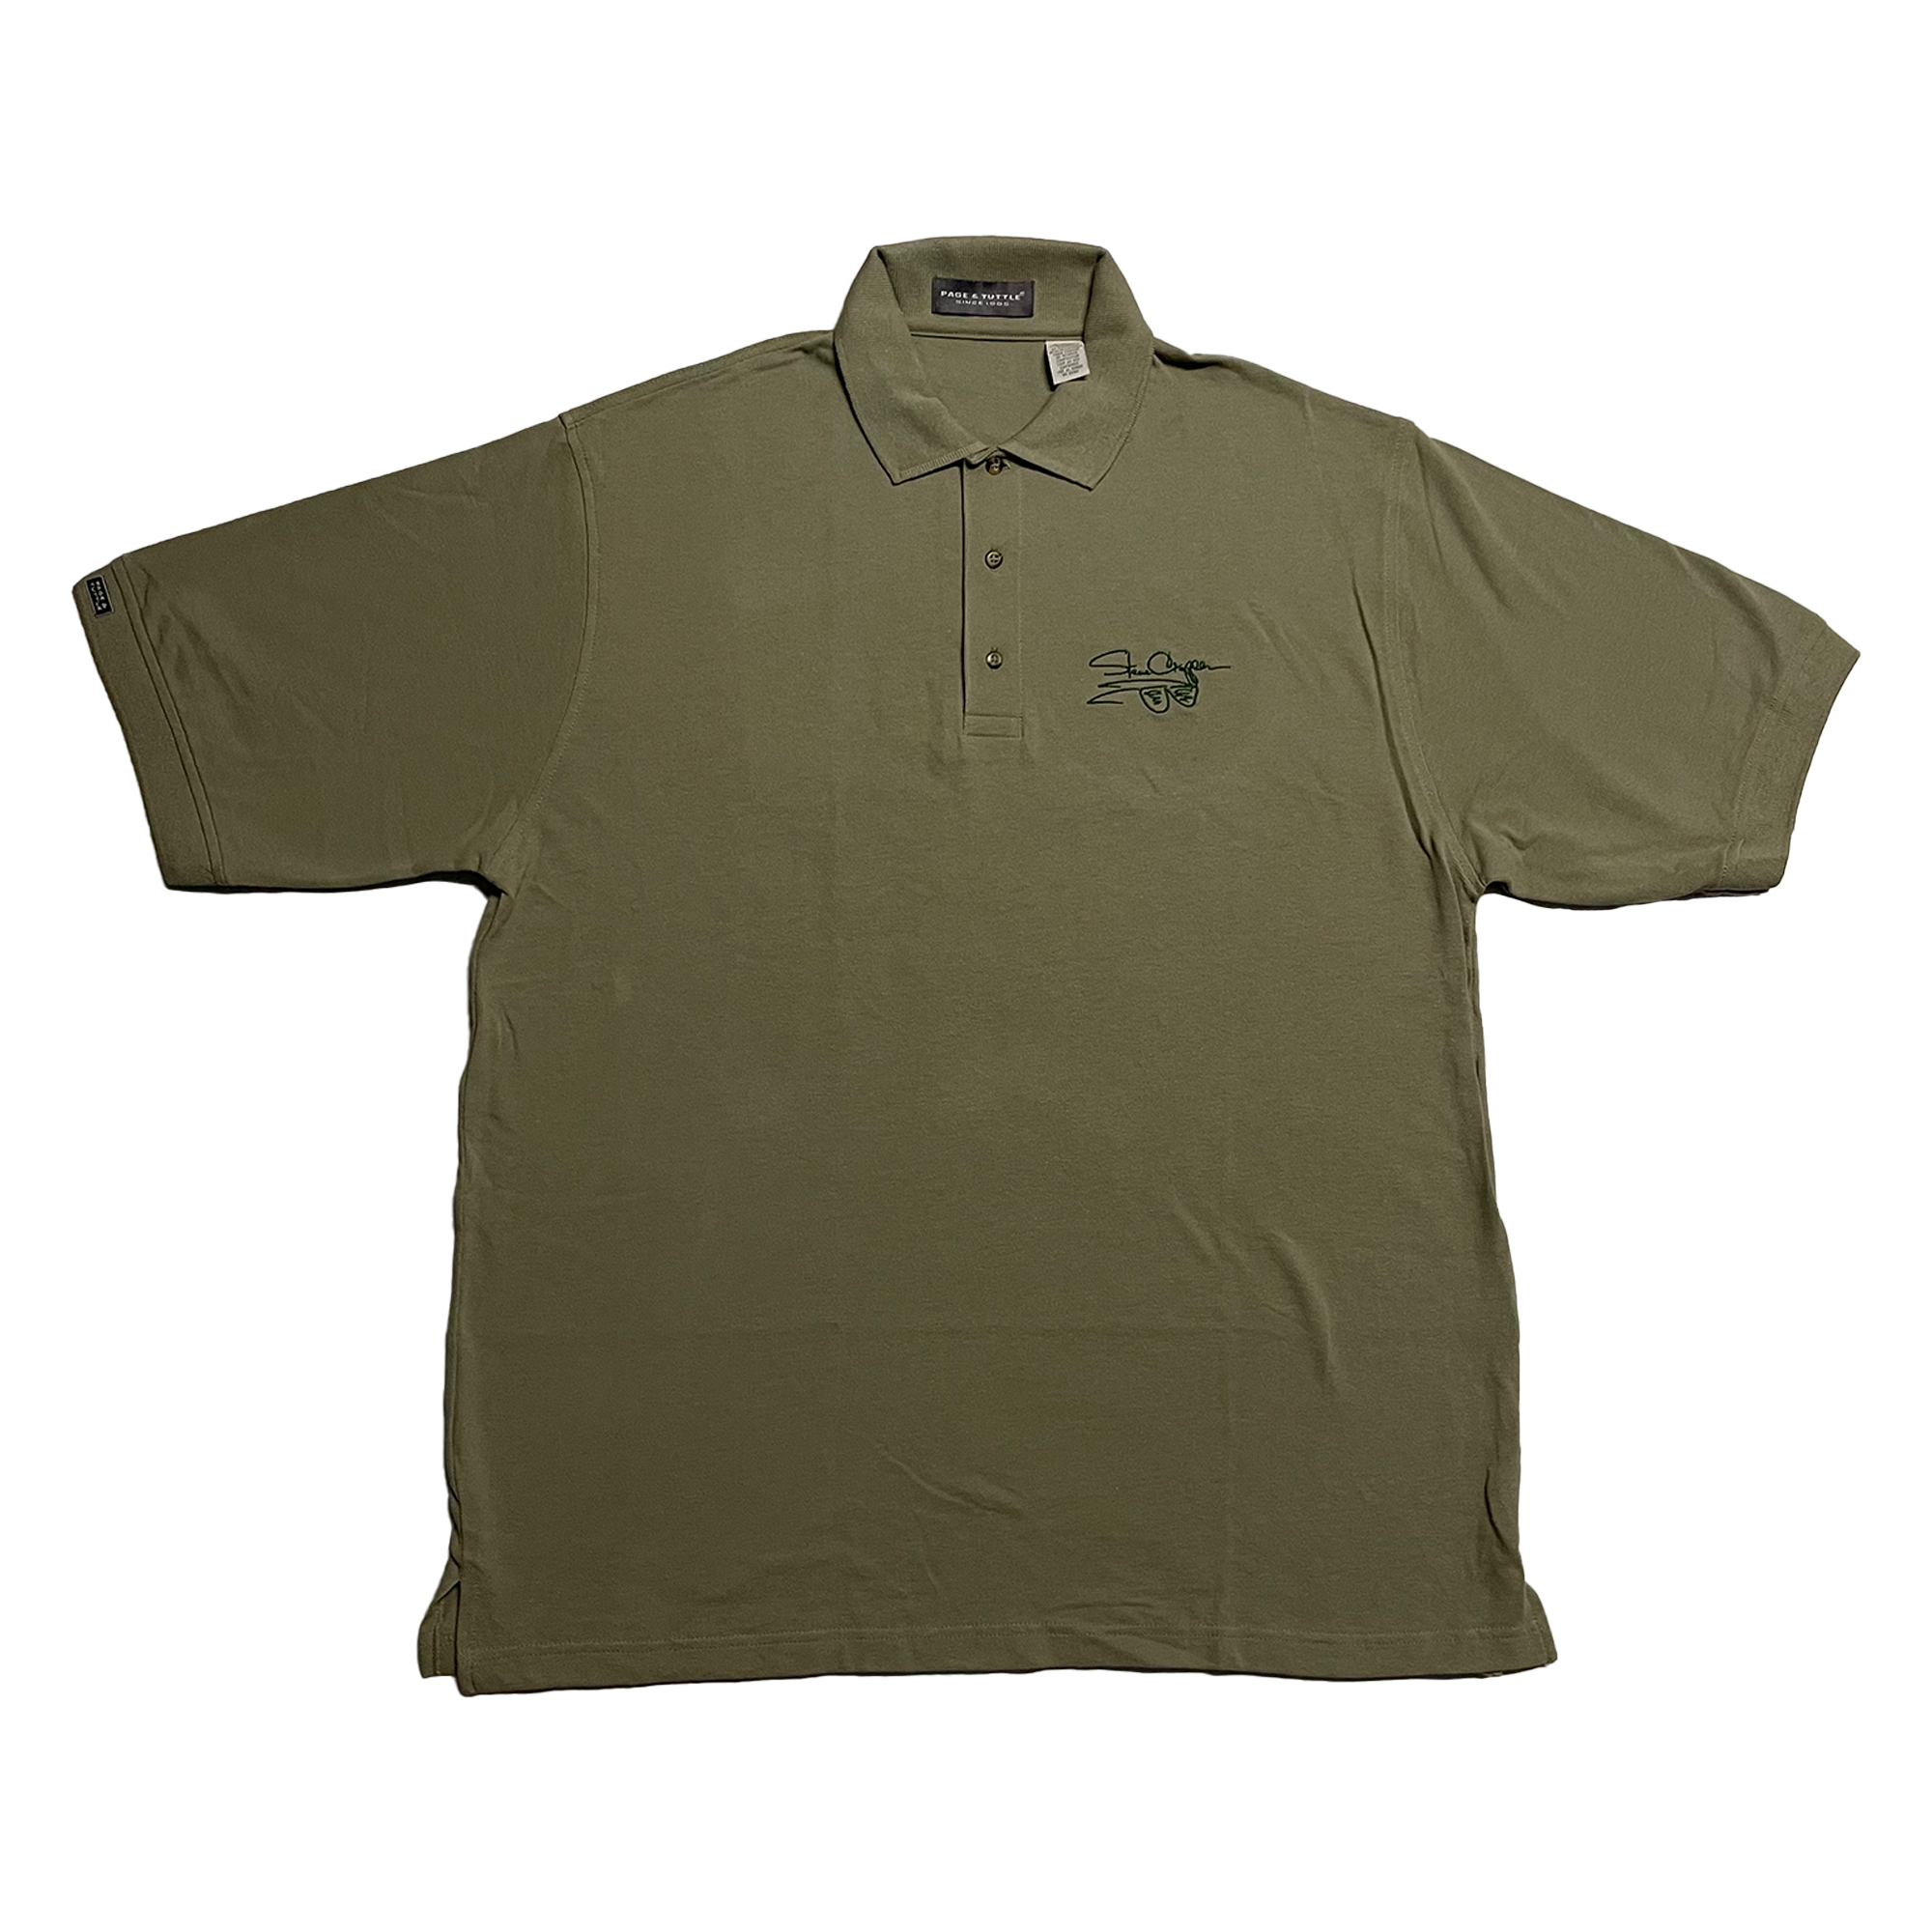 Steve Cropper - Embroidered Olive Polo Shirt